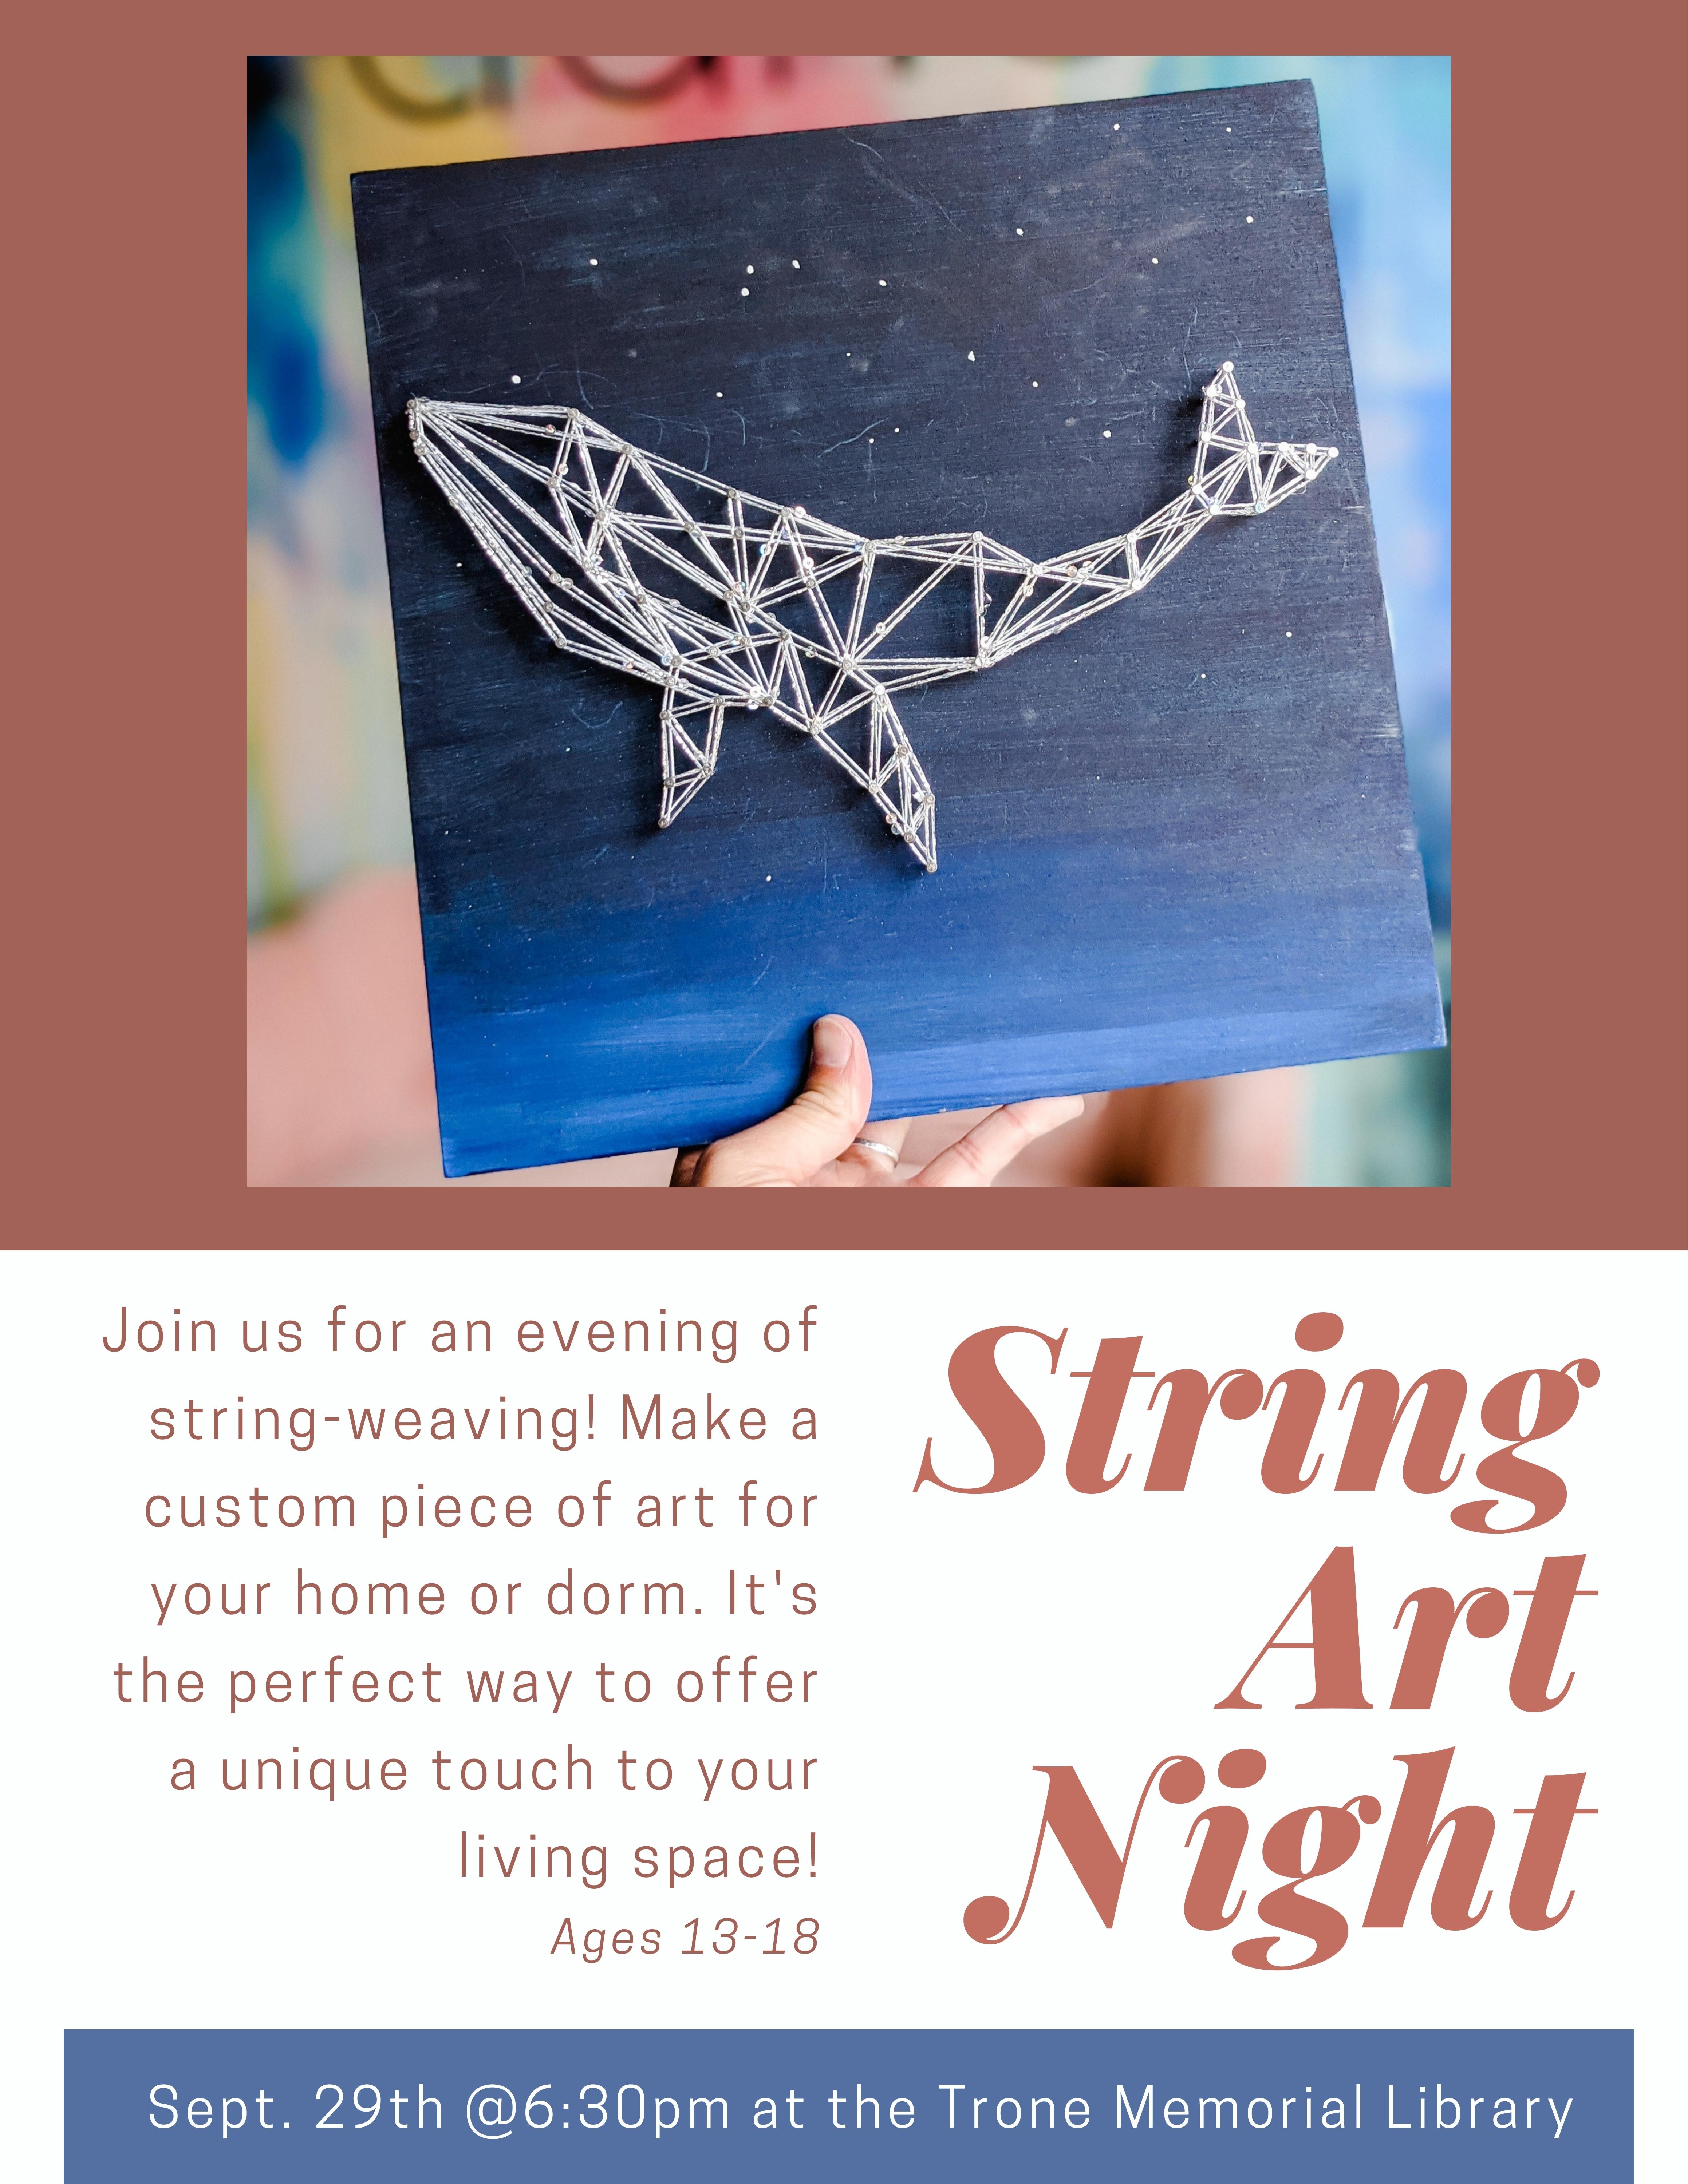 Image of a painted wooden board that has string art of a whale on it. Text reads "String Art Night: Join us for an evening of string-weaving! Make a custom piece of art for your home or dorm. It's the perfect way to offer a unique touch to your living space! Ages 13-18. Sept. 29th at the Trone Memorial Library.